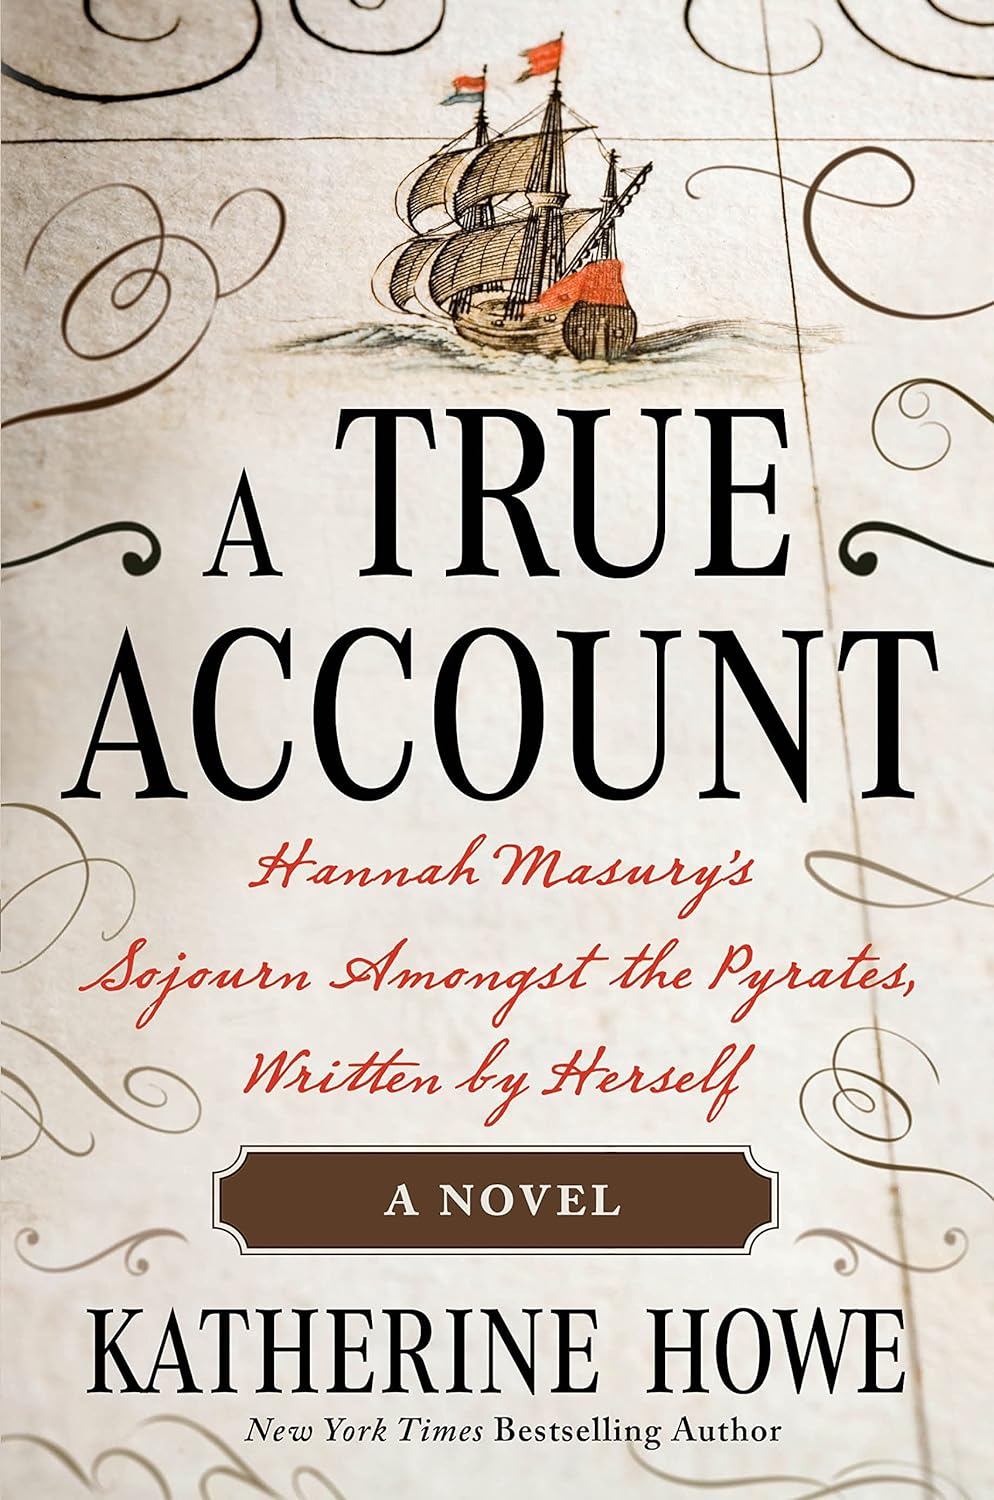 One of our recommended books is A True Account by Katherine Howe